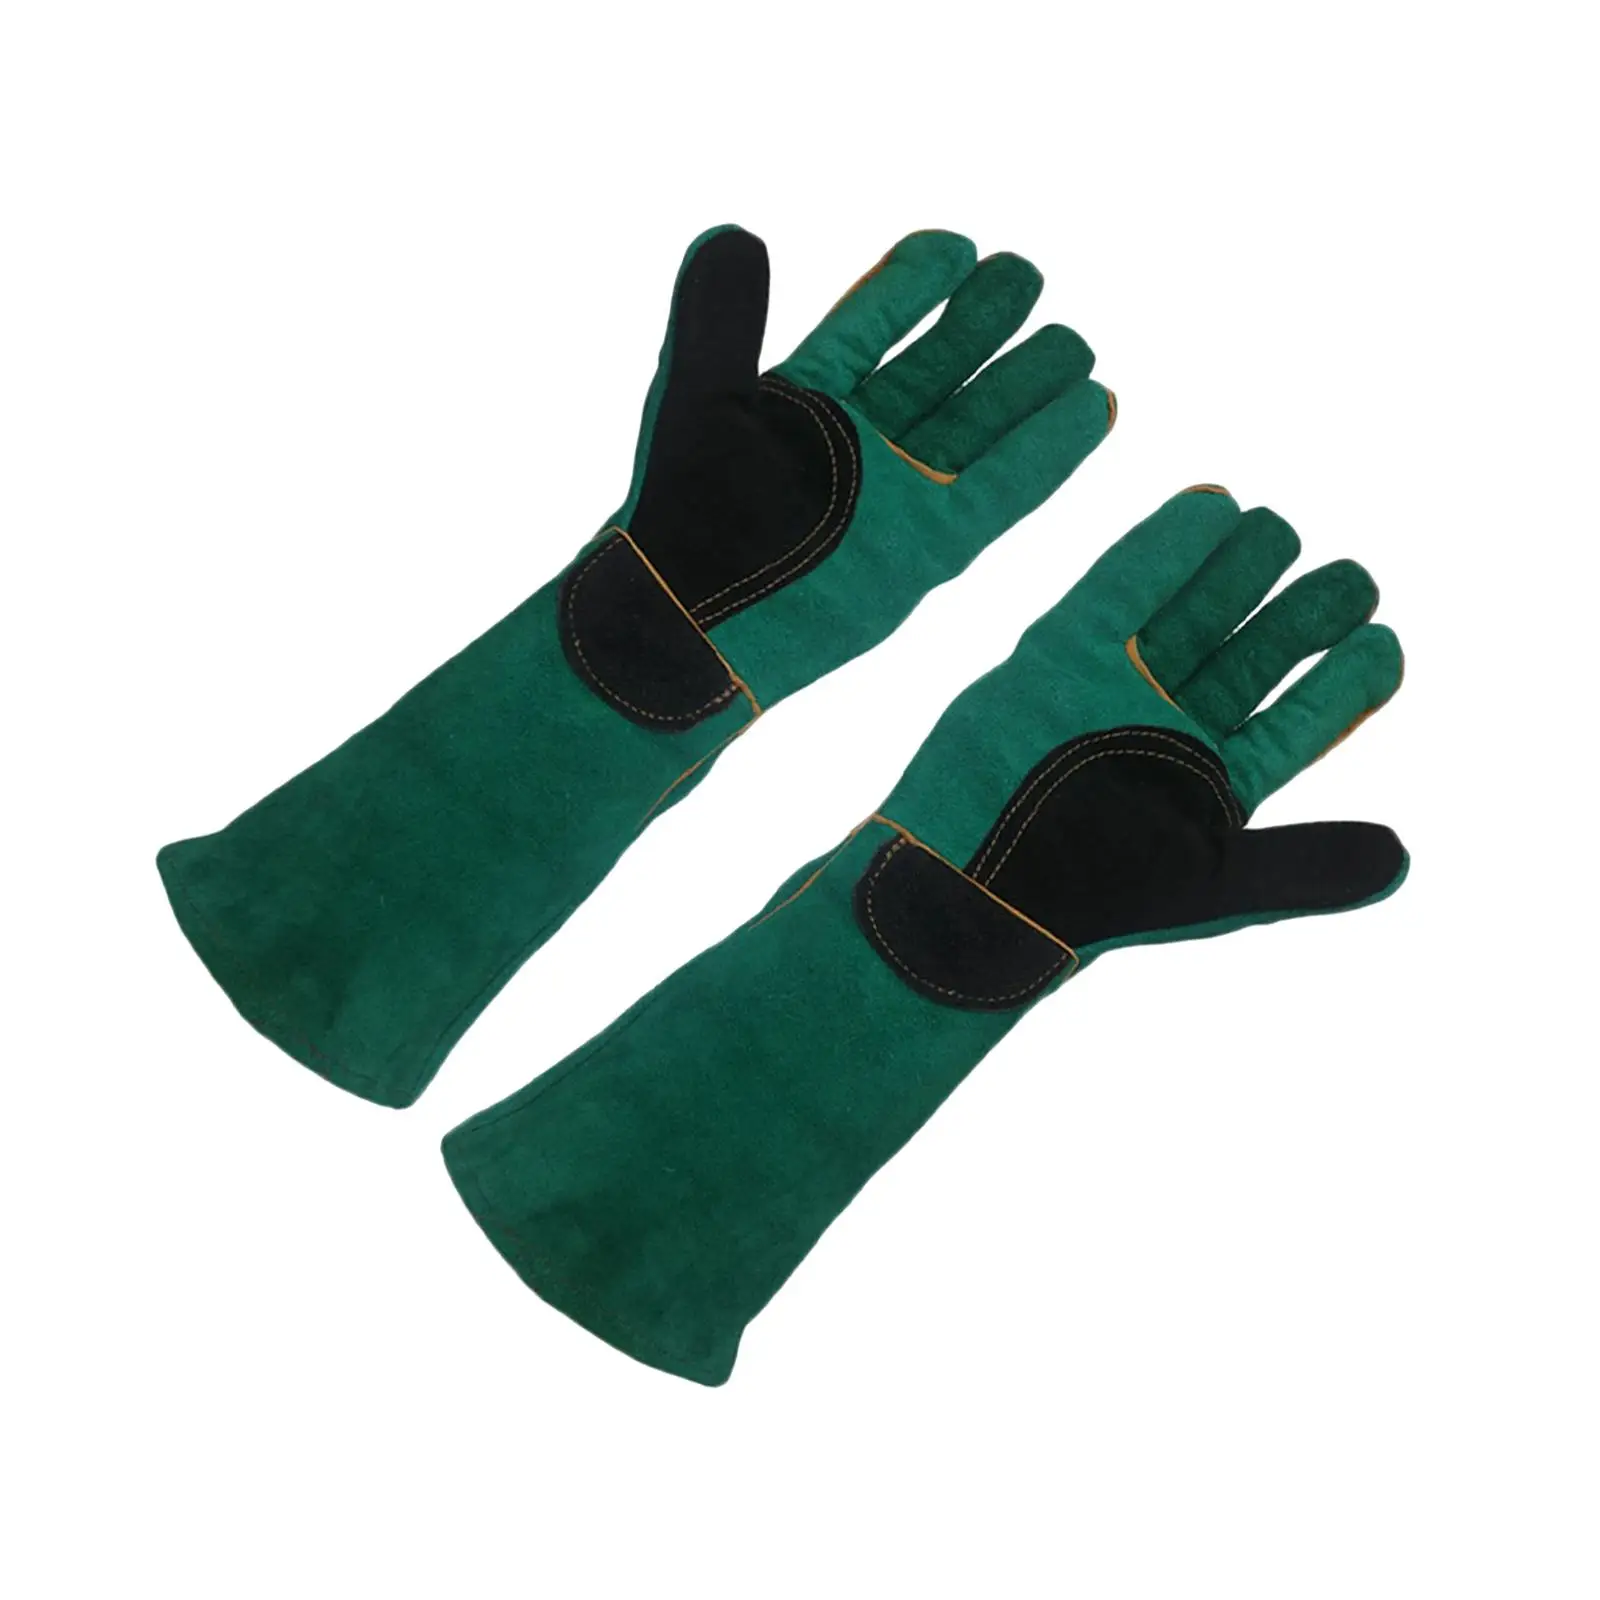 Animal Handling Gloves Reinforced Leather Pet Supplies Protective for Parrot